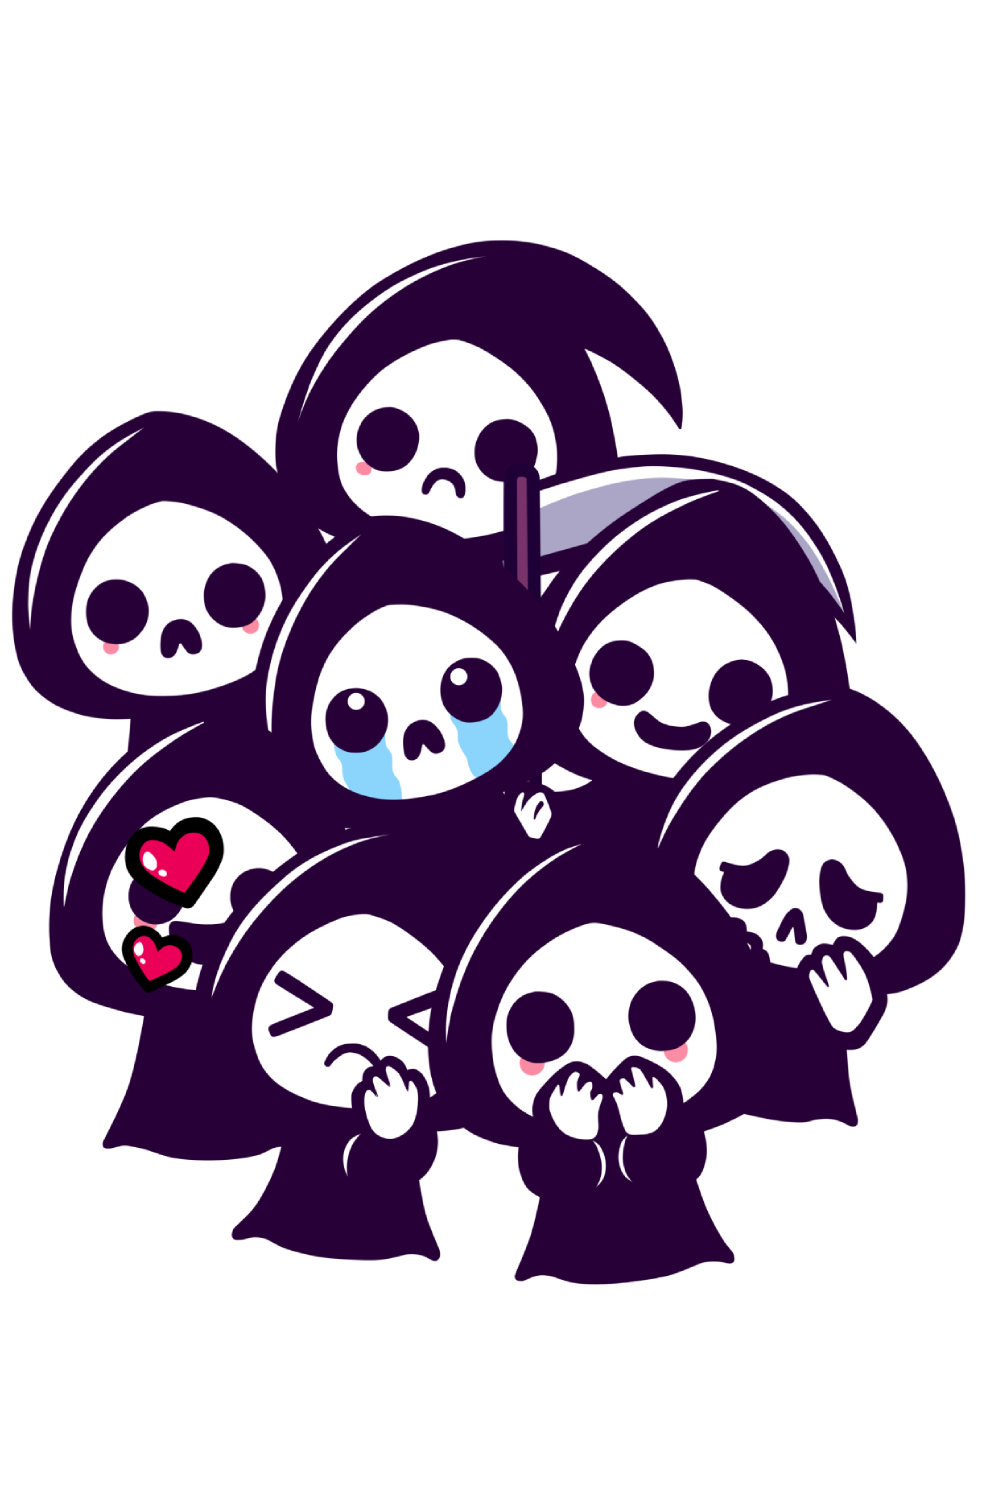 Sticker pack with cute death pinterest preview image.